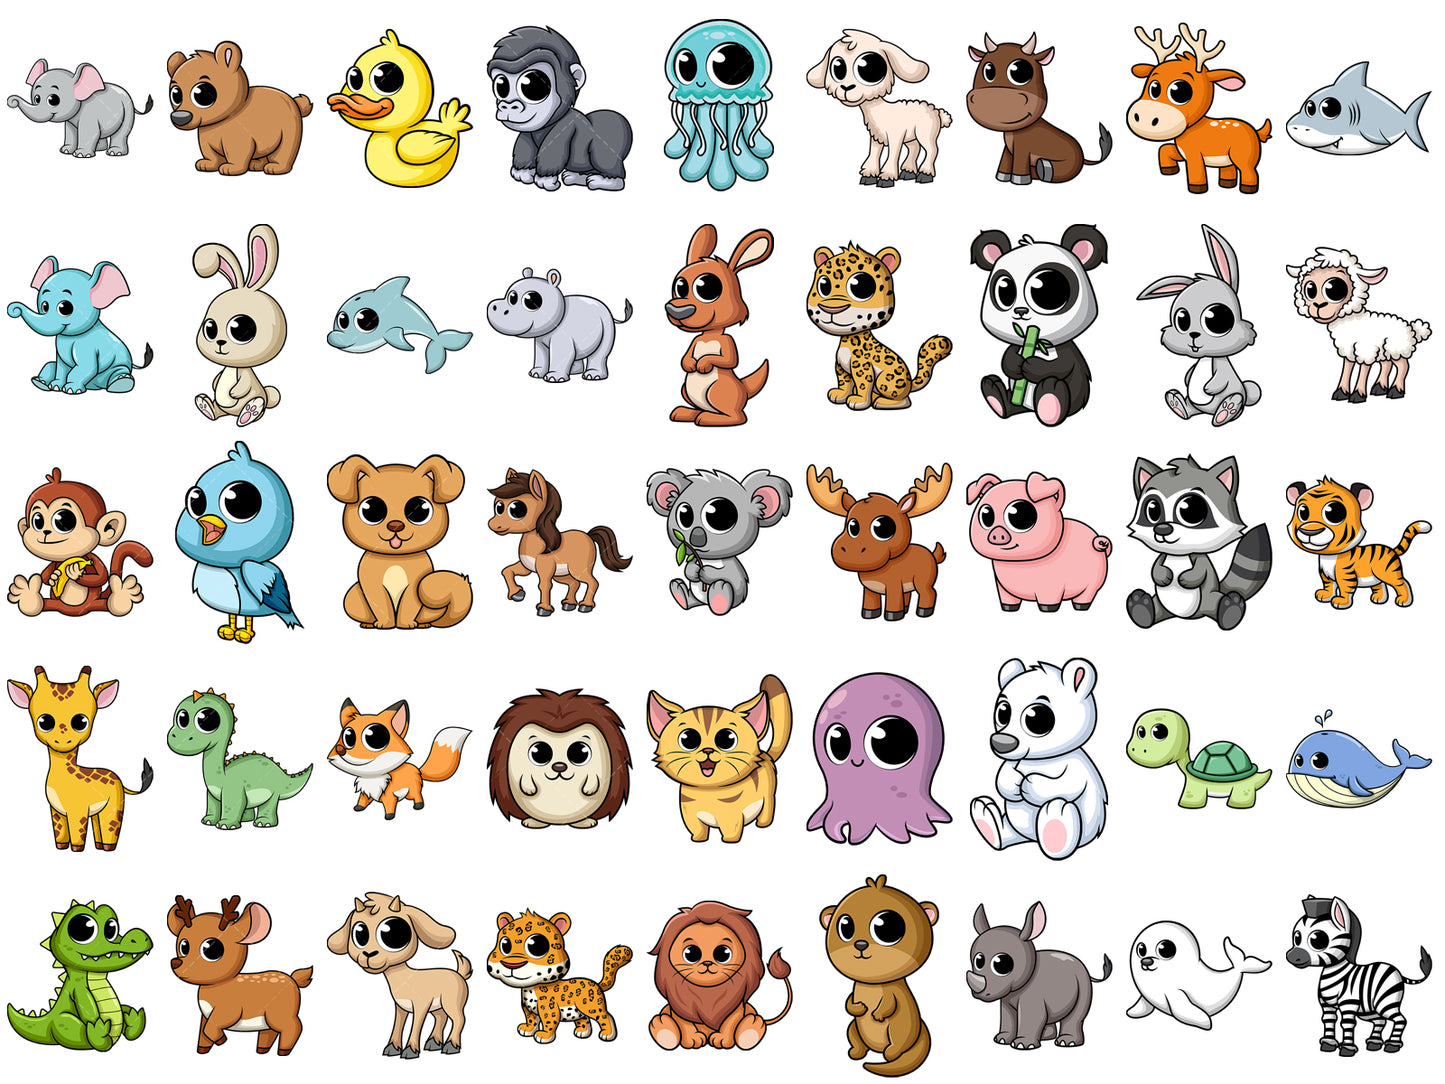 A bundle of 45 royalty-free stock vector illustrations of baby animals.